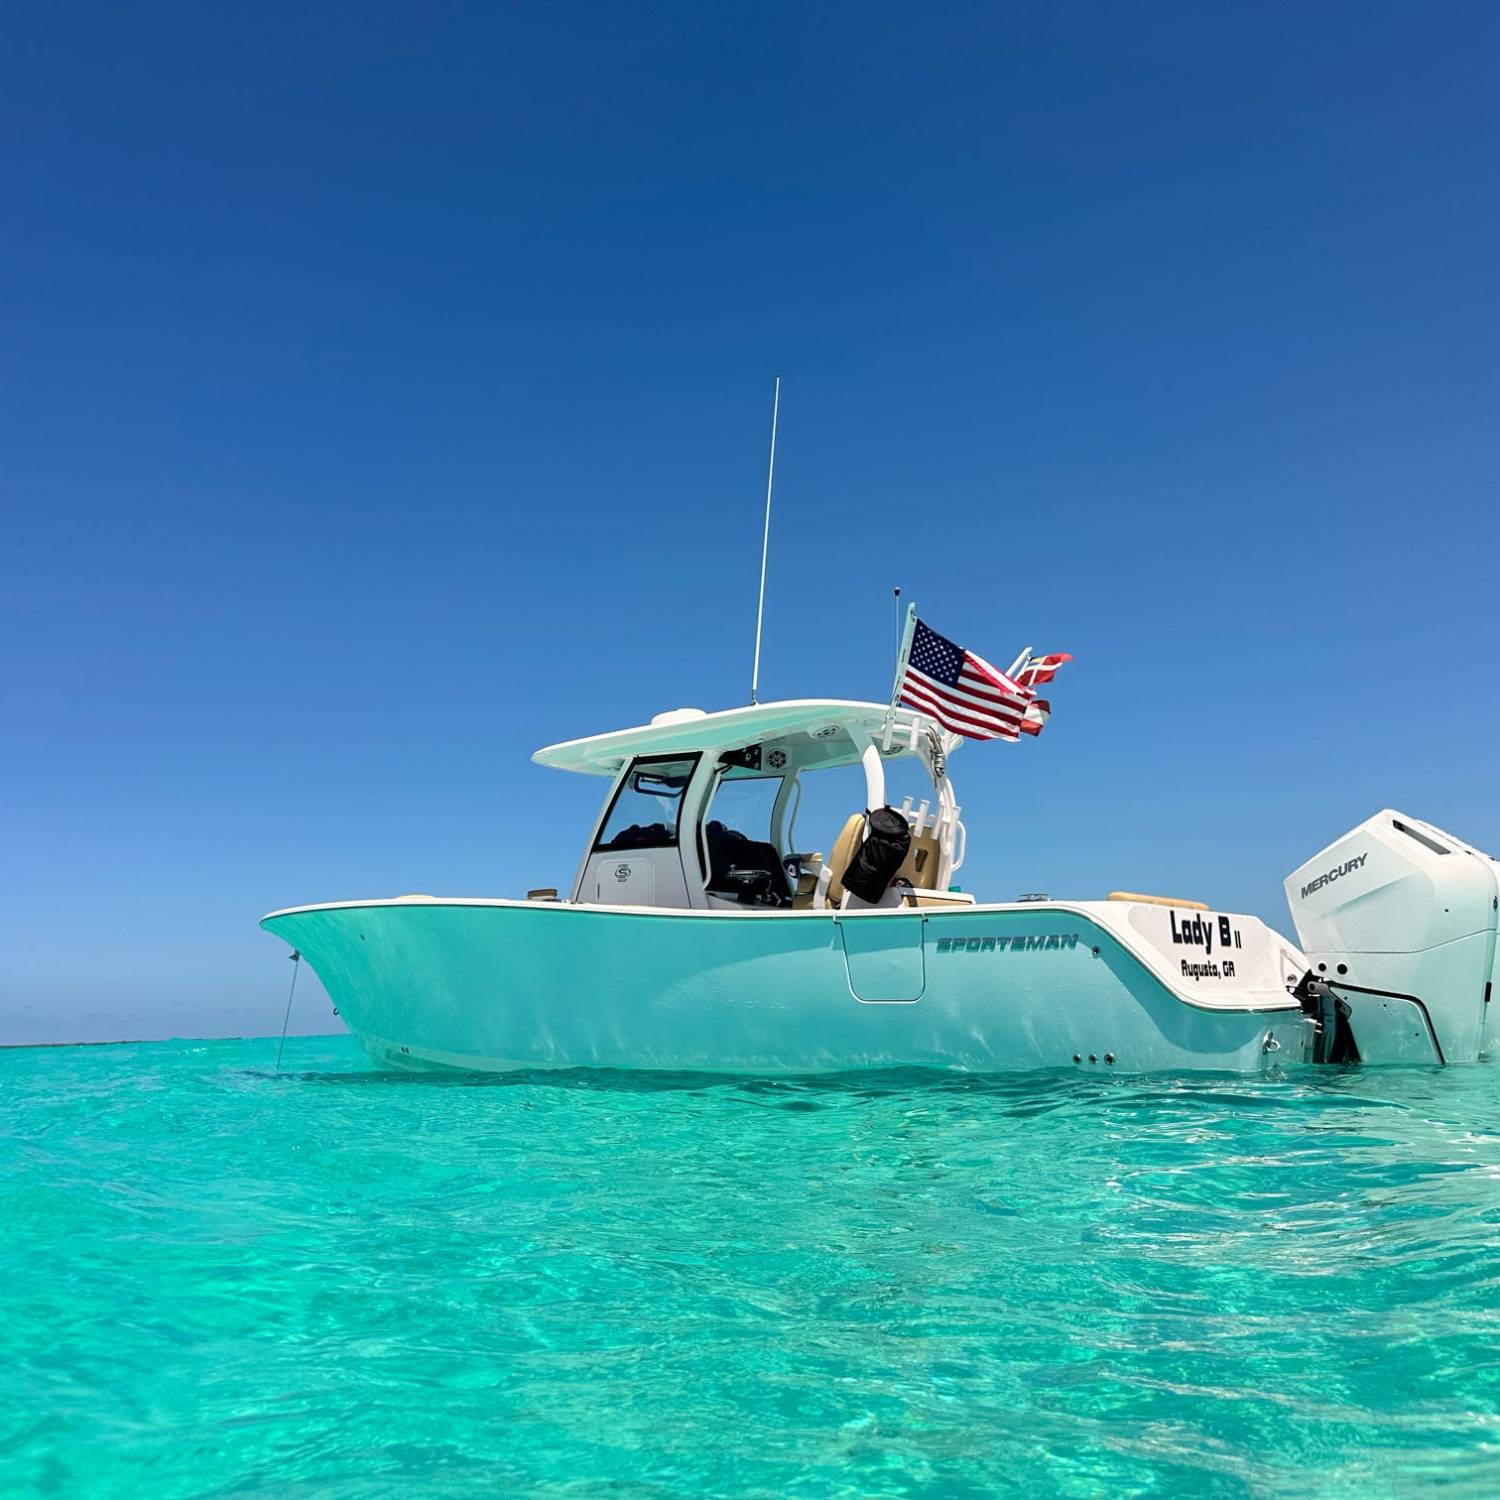 Boat floating in the abaco waters